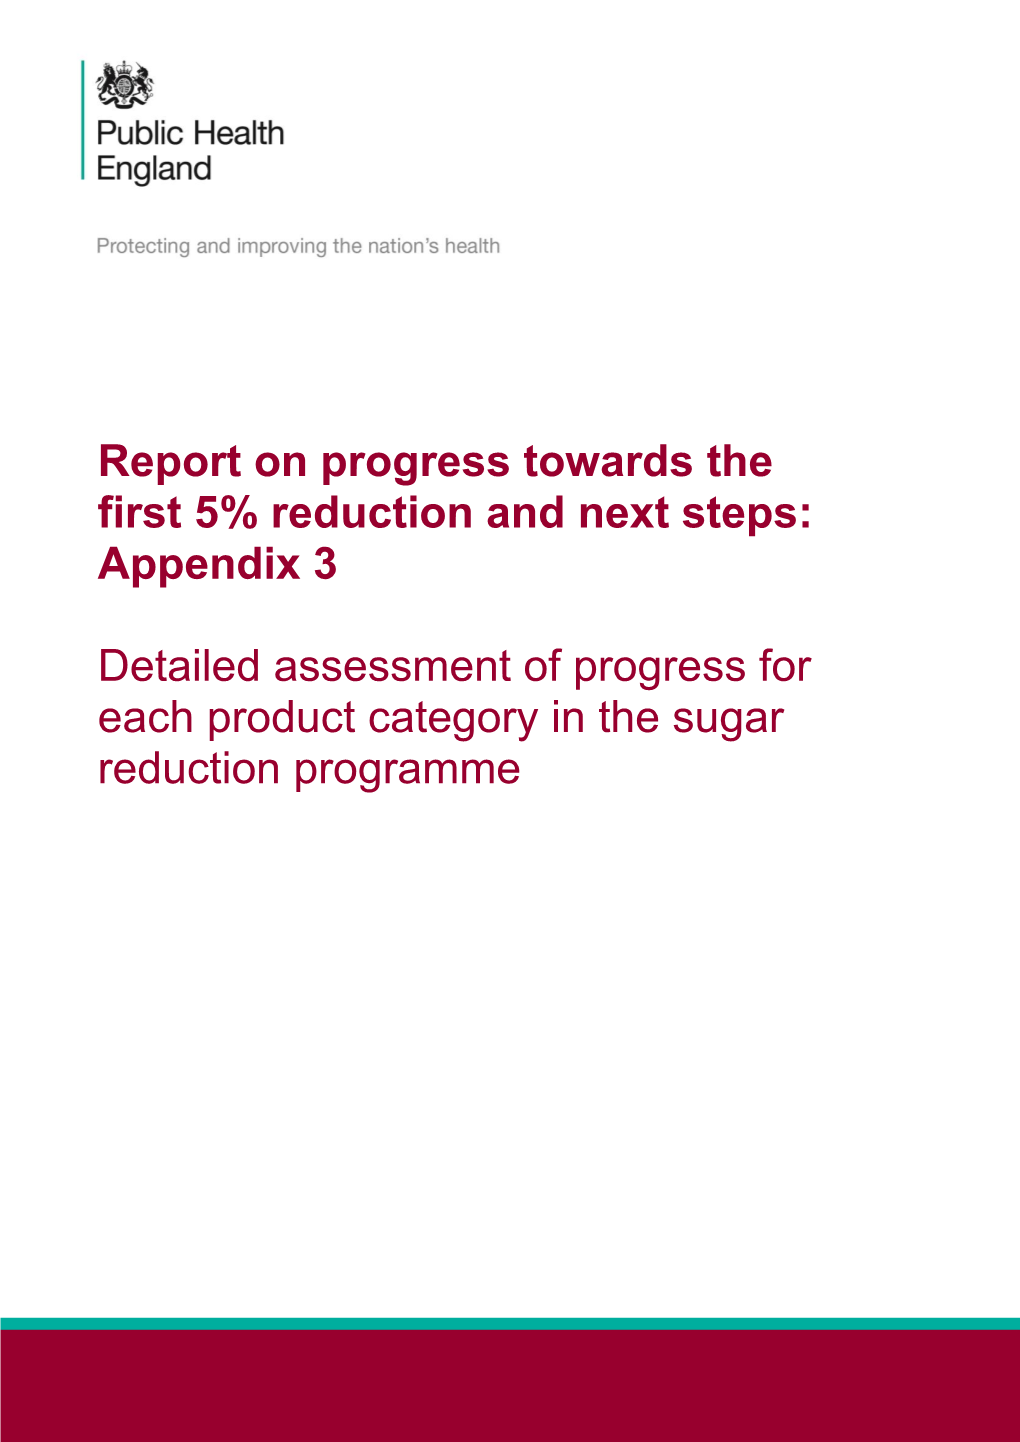 Detailed Assessment of Progress for Each Product Category in the Sugar Reduction Programme